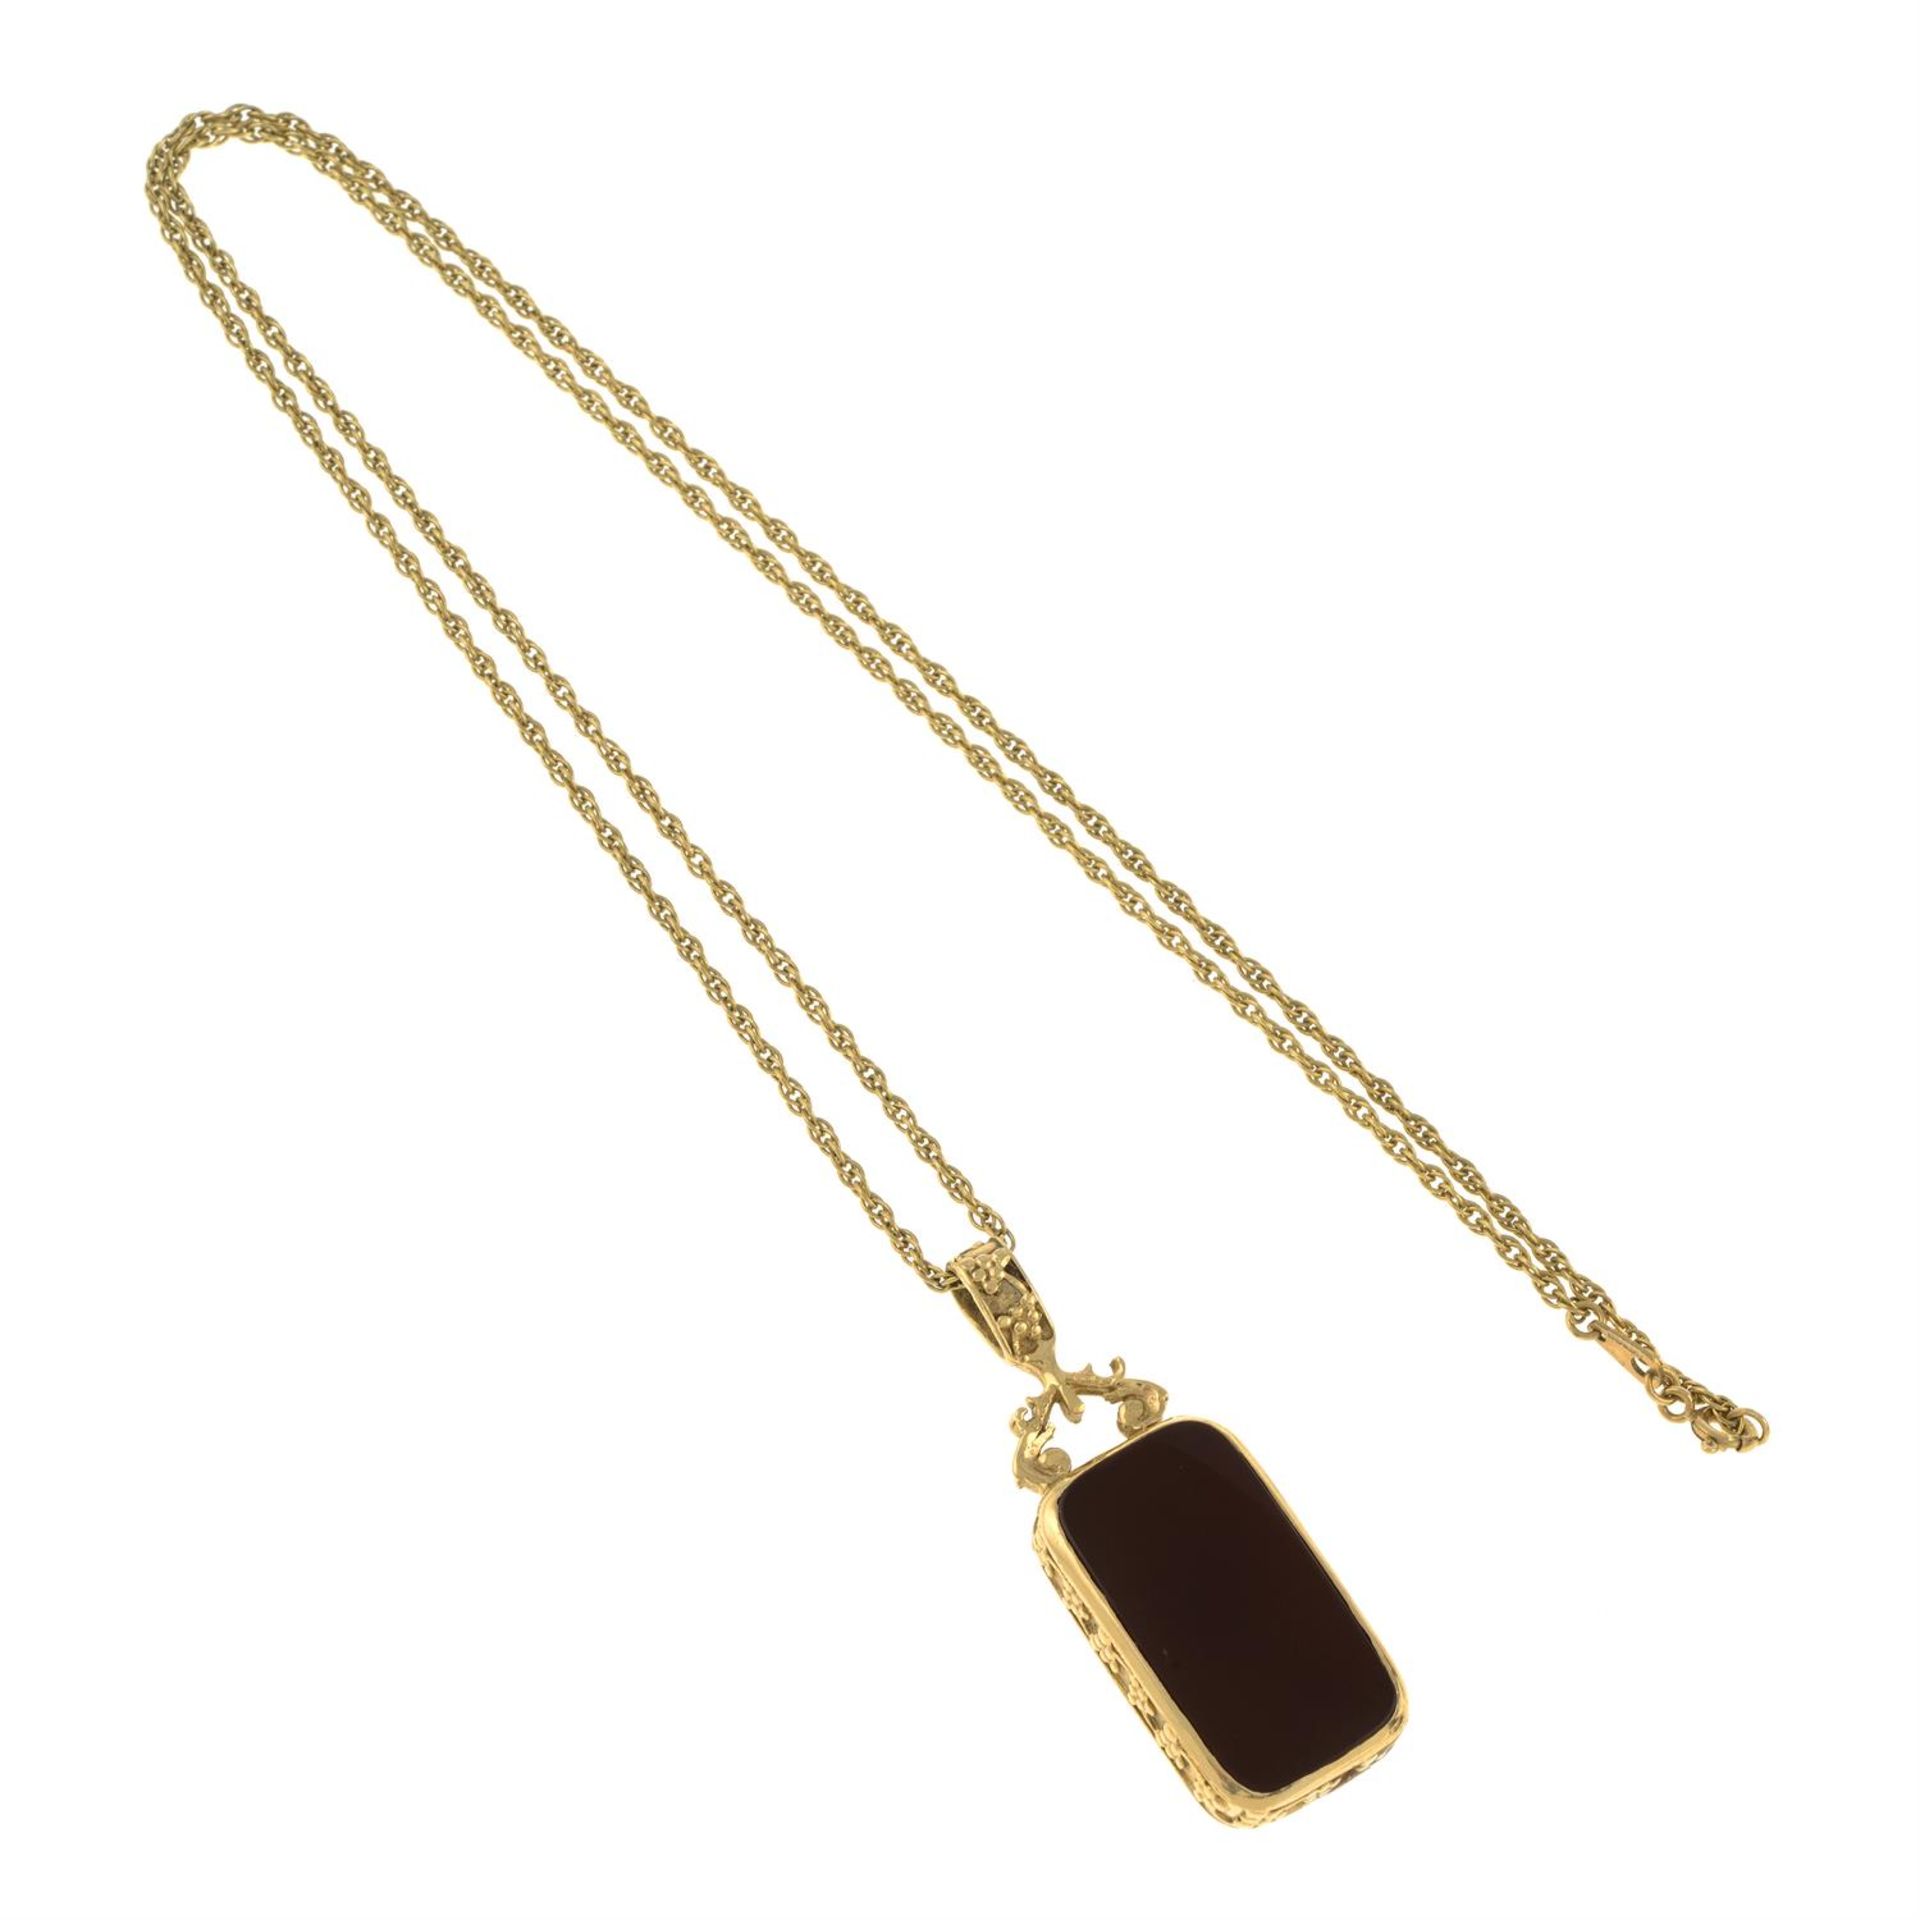 9ct gold onyx & carnelian pendant, with chain - Image 2 of 2